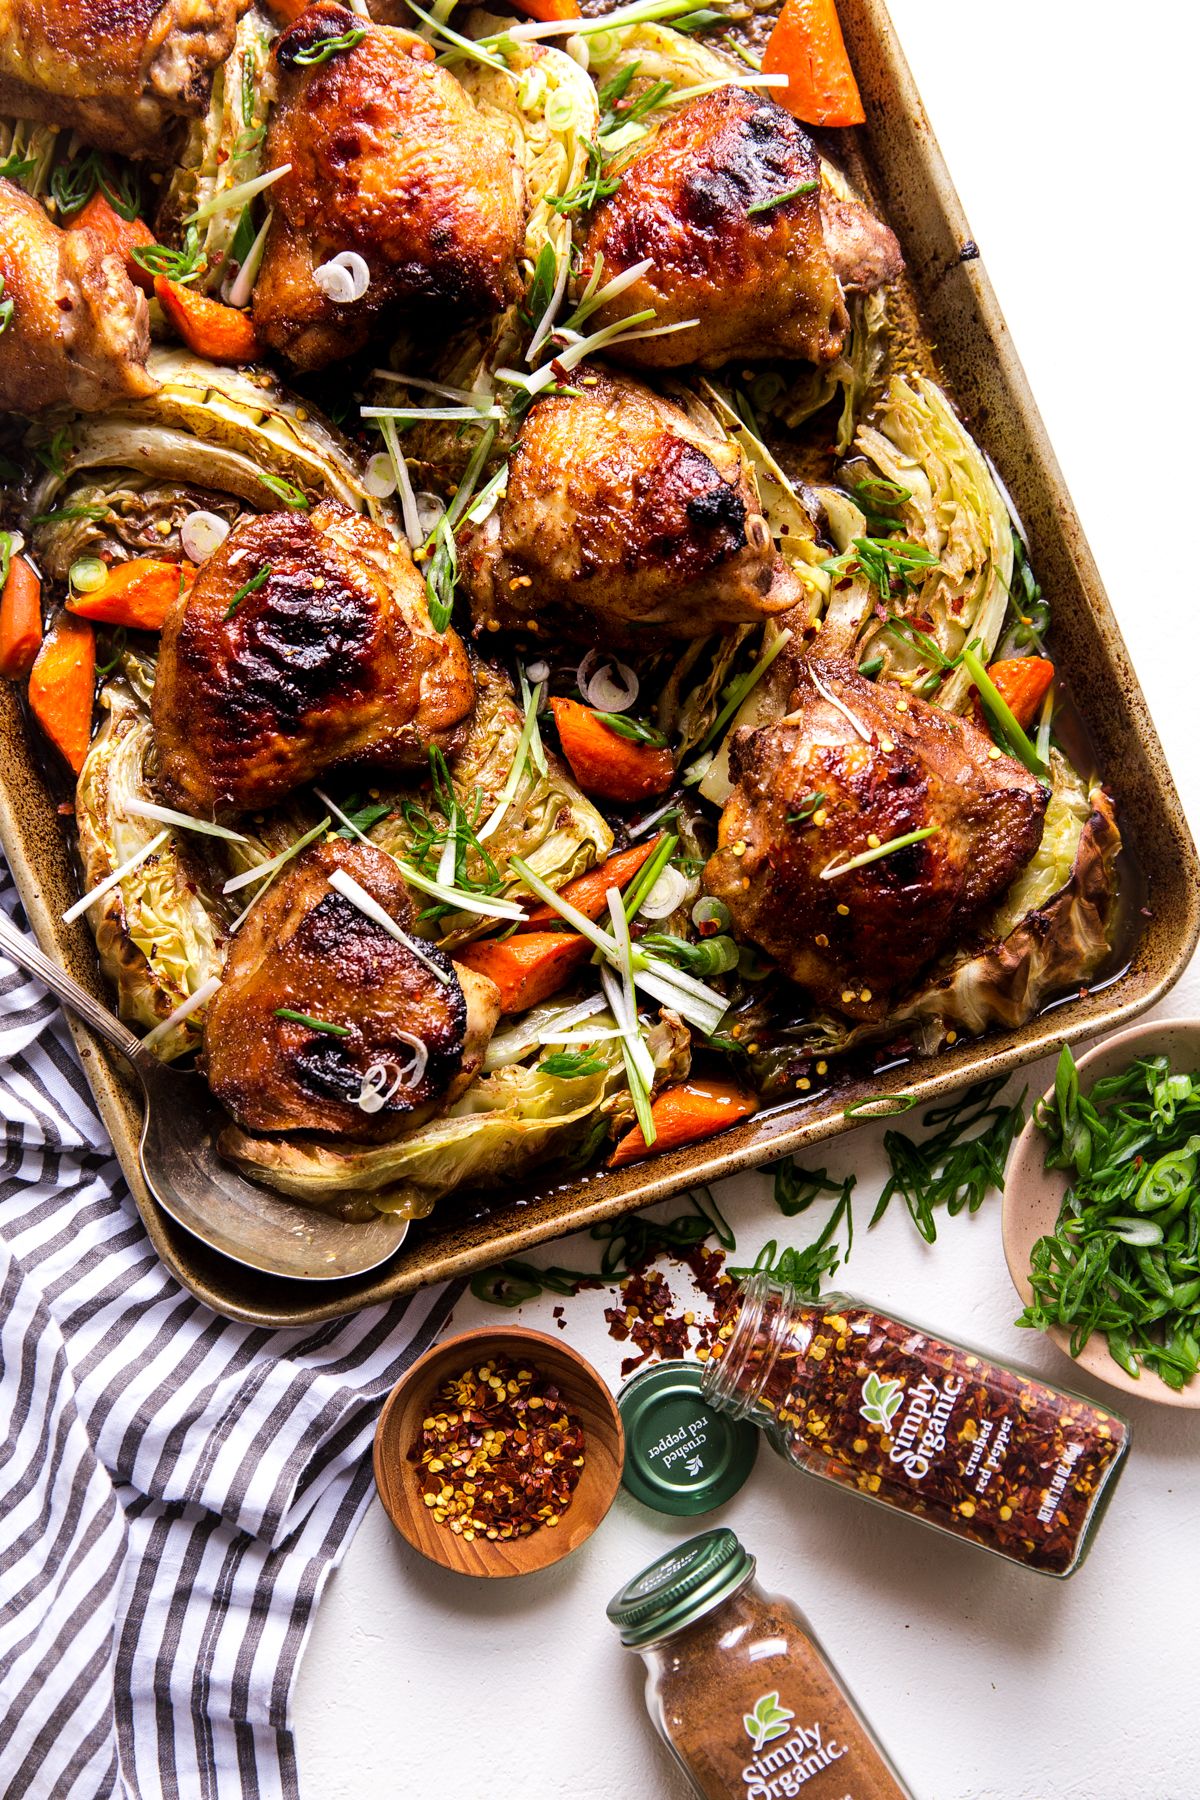 Five Spice Roasted Chicken With Carrots And Cabbage Recipe The Feedfeed